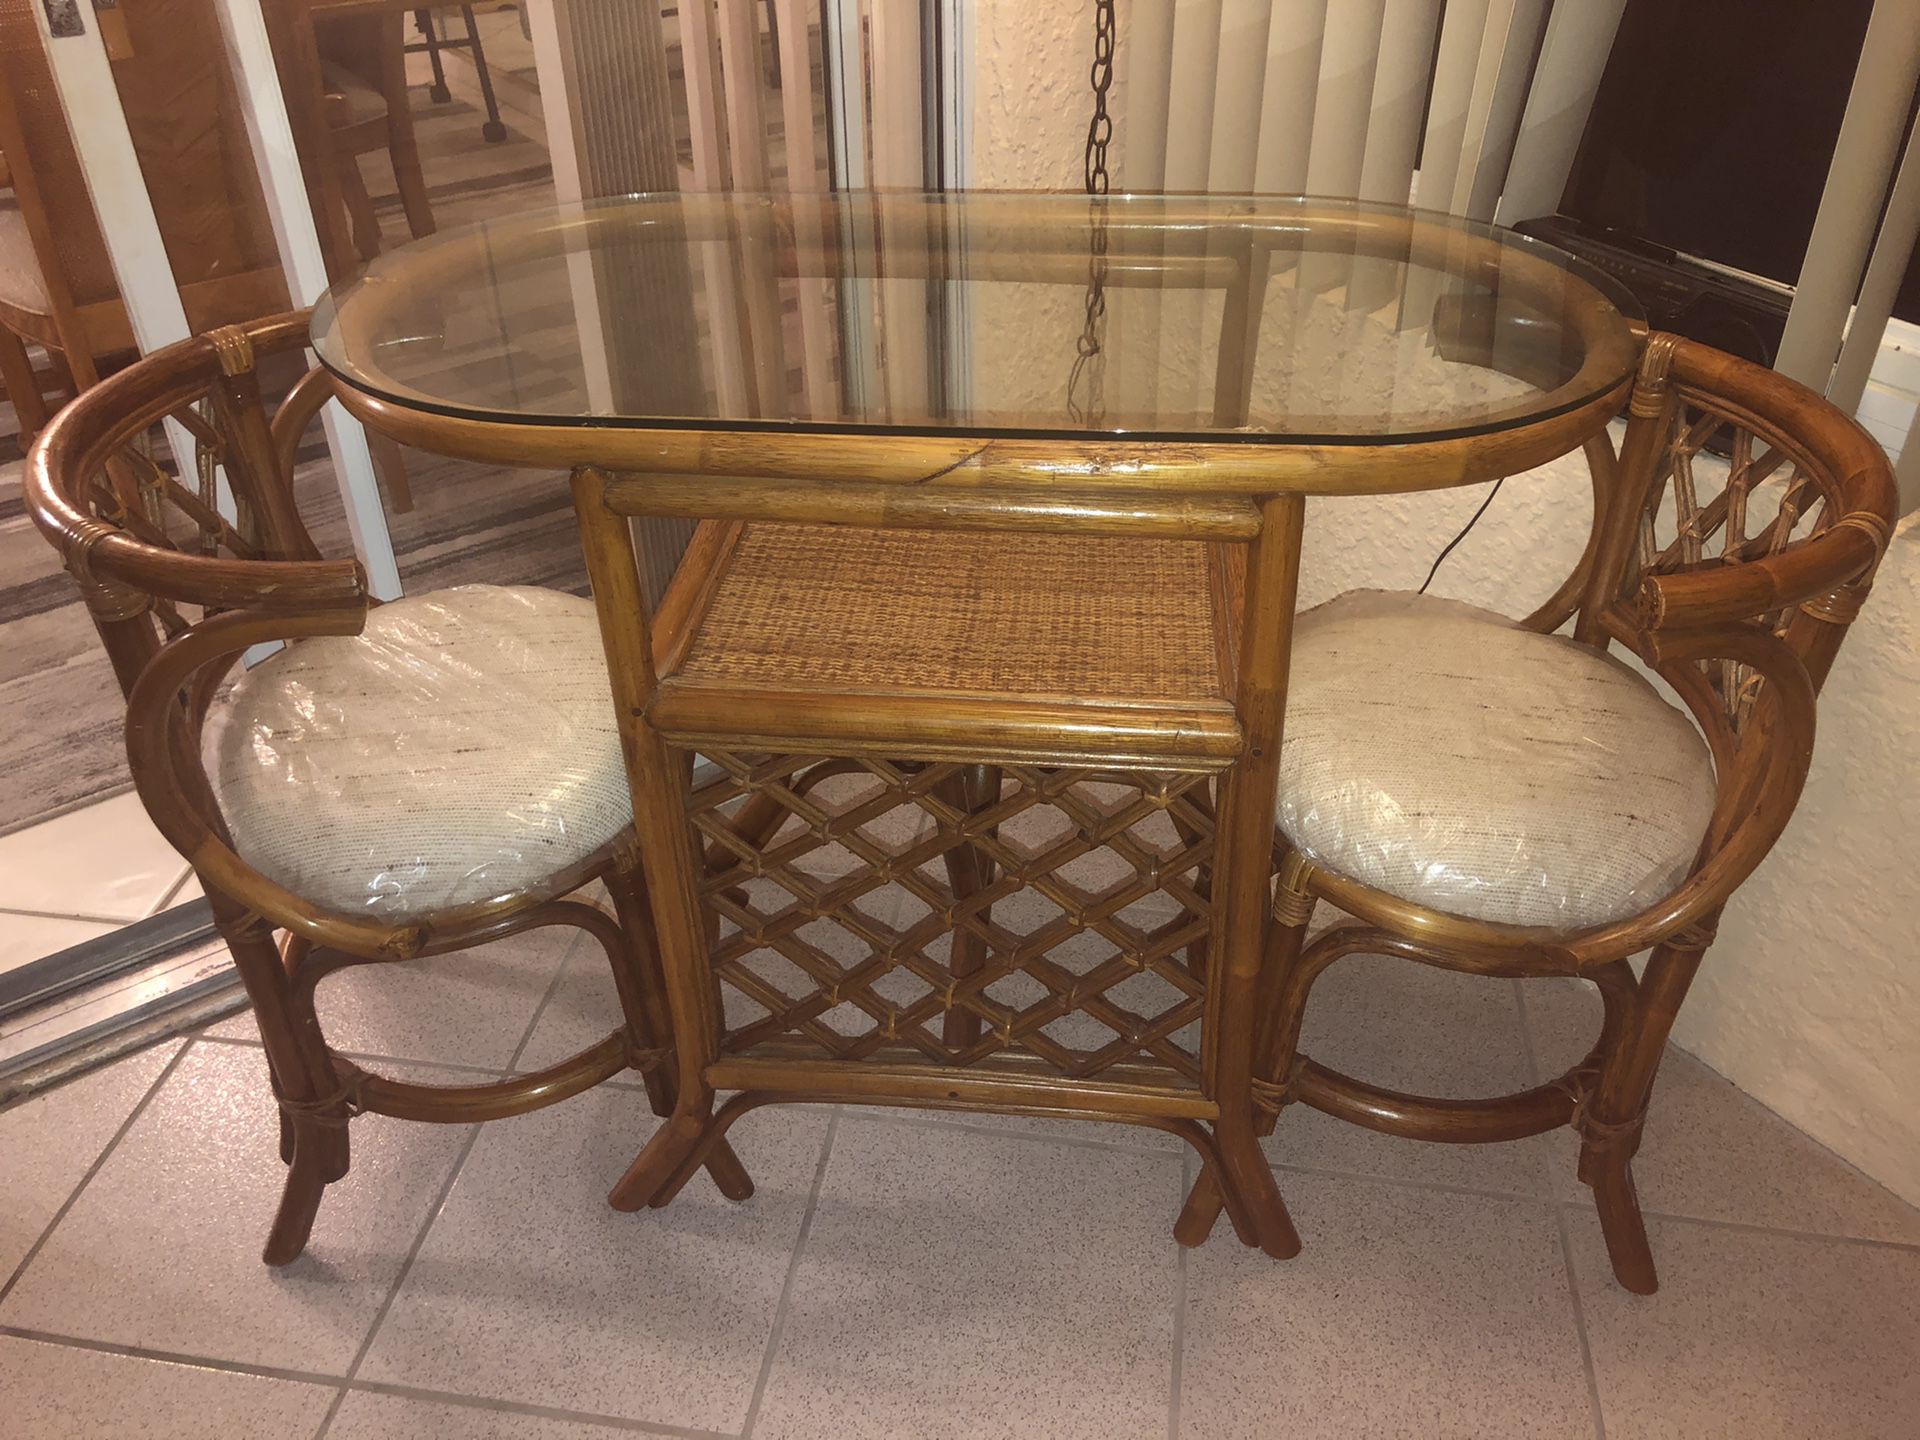 Wicker glass table and chairs